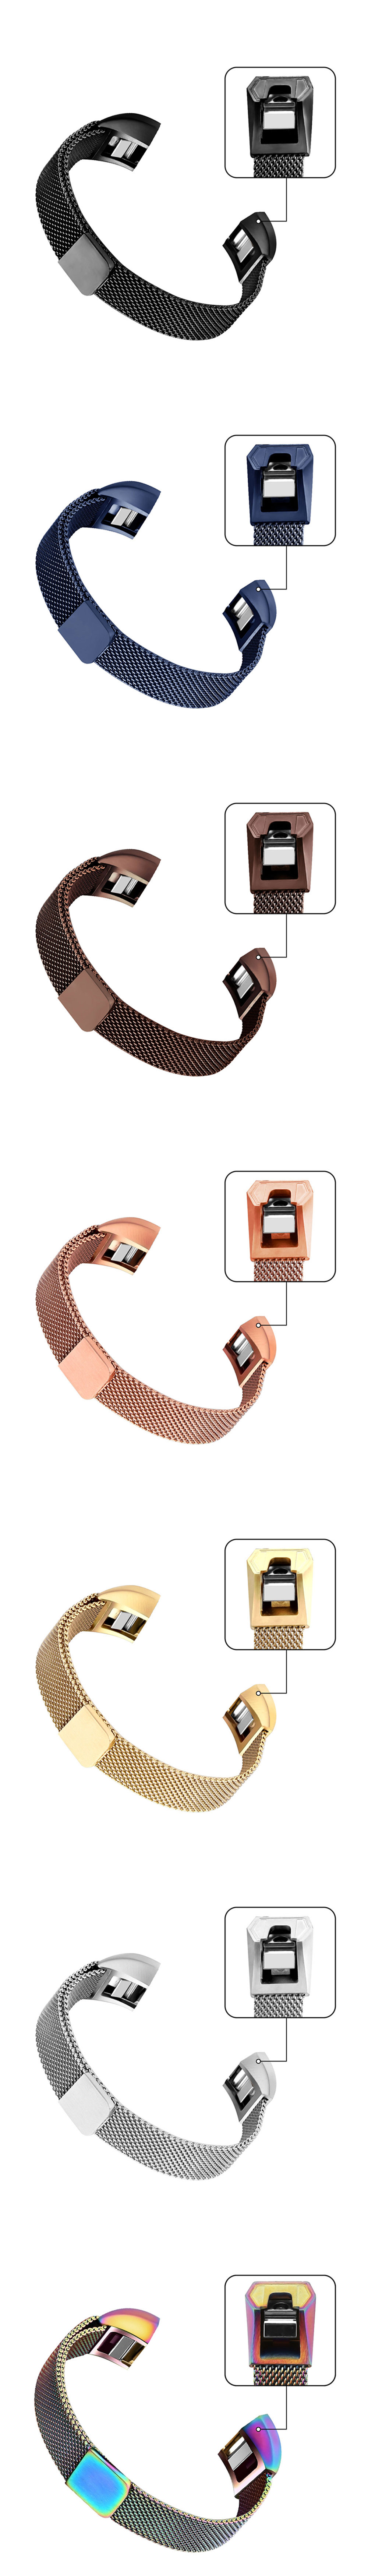 12mm-Watch-Band-Milanese-Loop-Stainless-Steel-Strap-Replacement-for-Fitbit-Alta-Smart-Watch-1289261